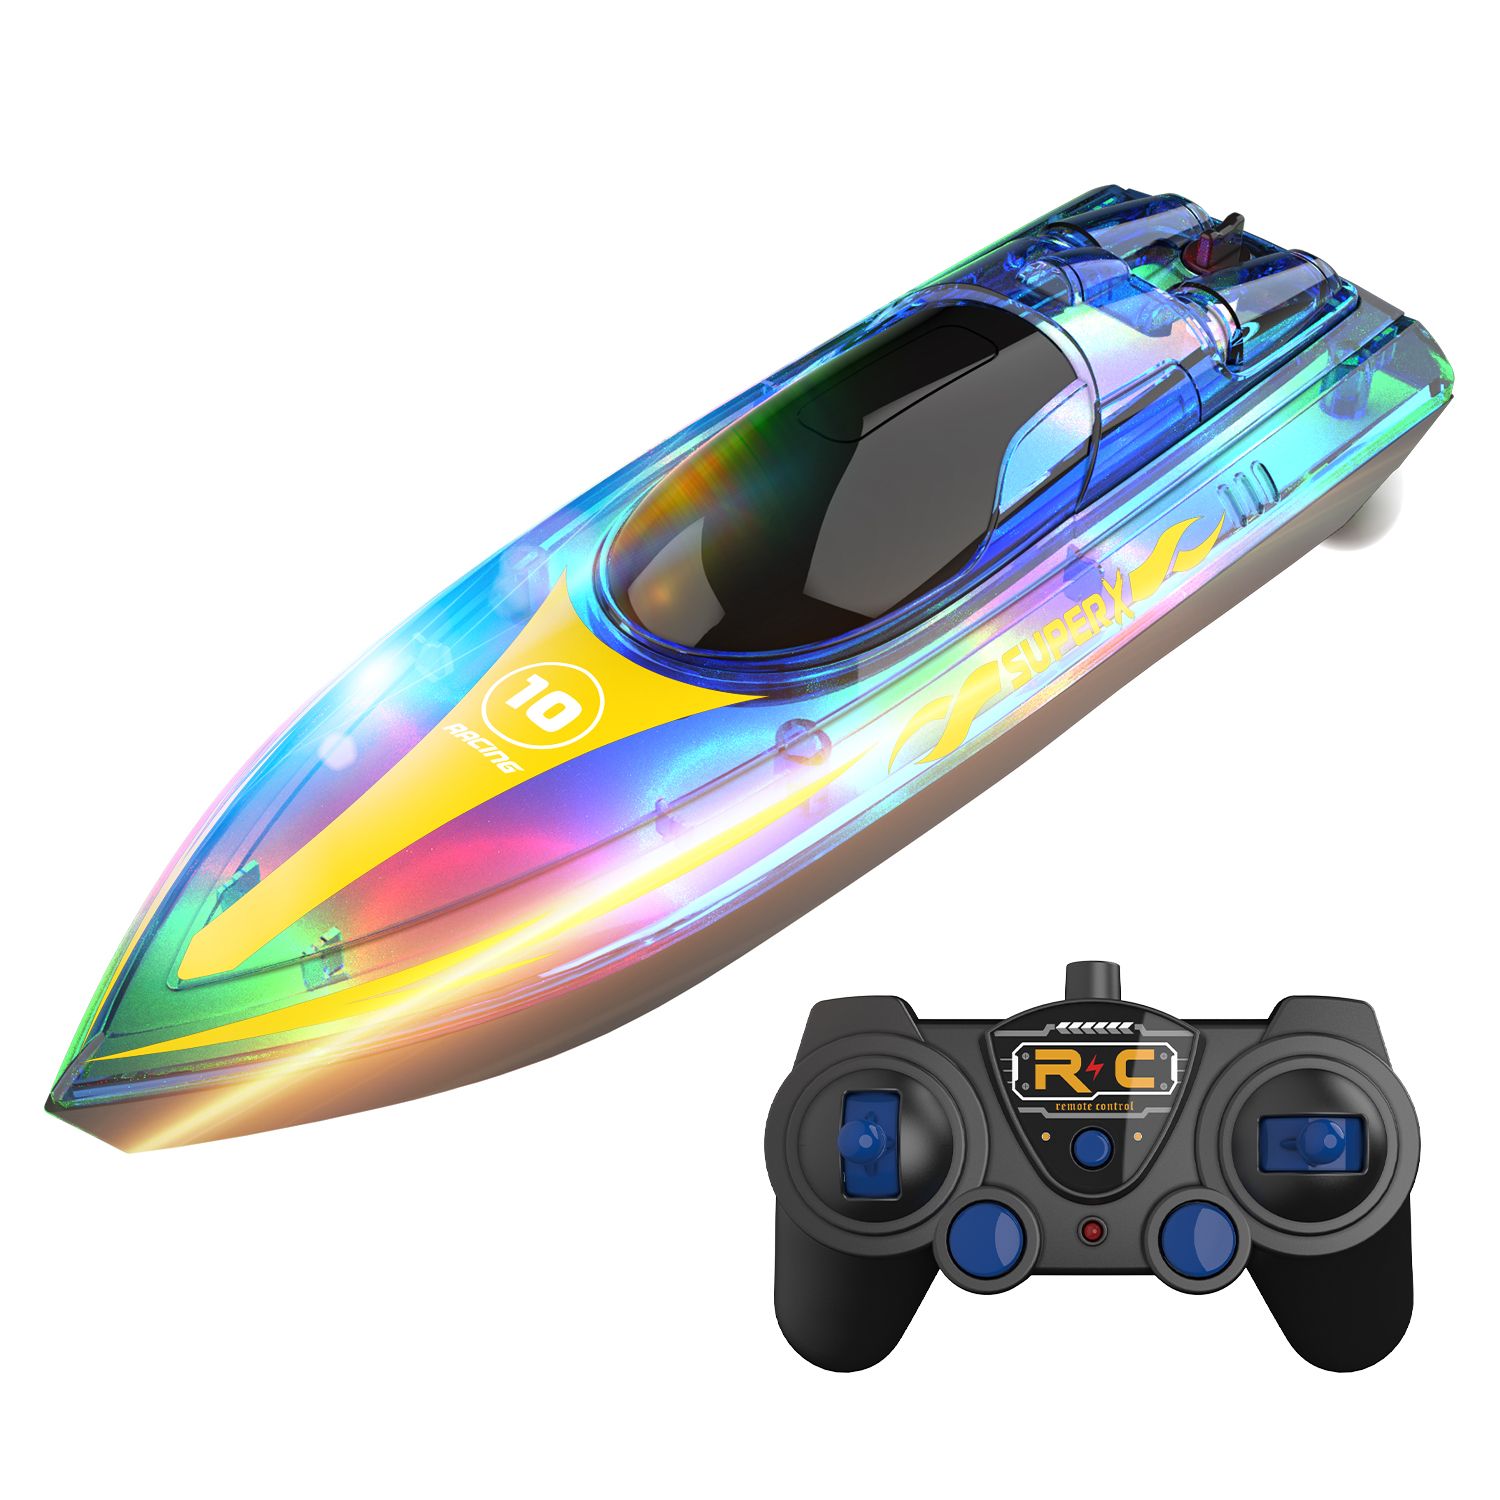 Waterproof Remote Control Boat Toys